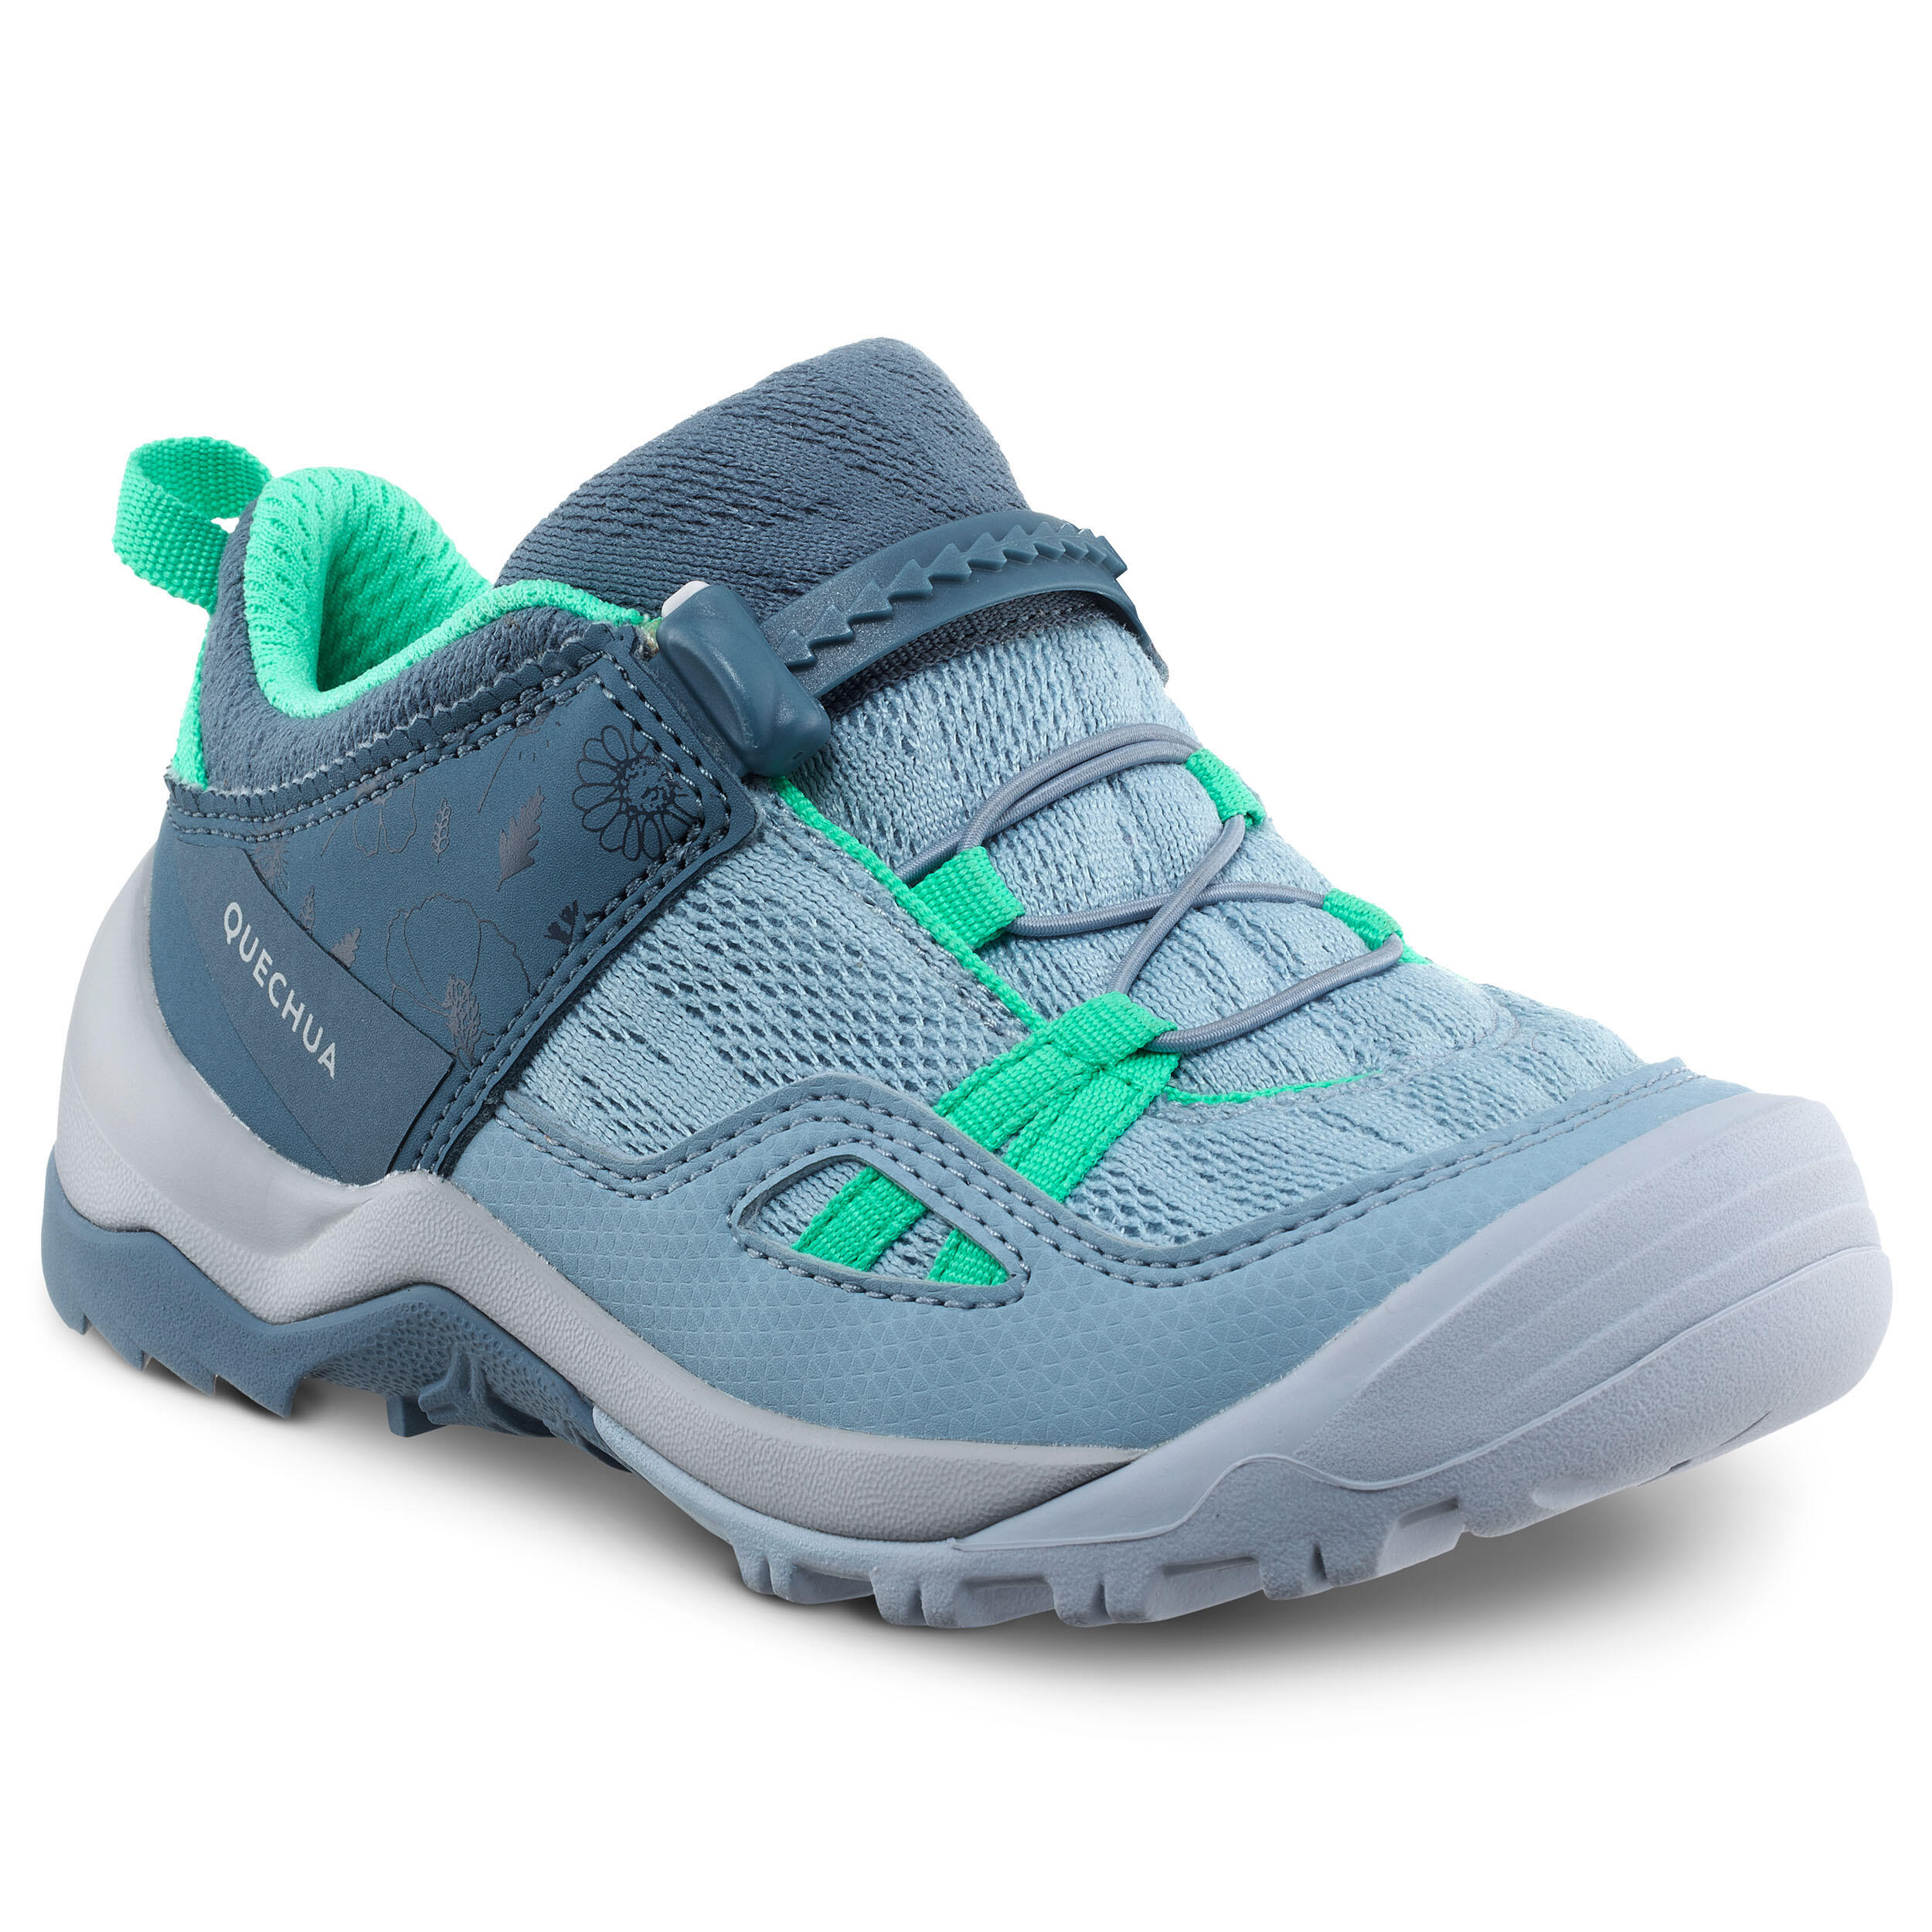 QUECHUA Kids’ Crossrock hiking shoes with quick adjustment, blue, from size 28 to 34